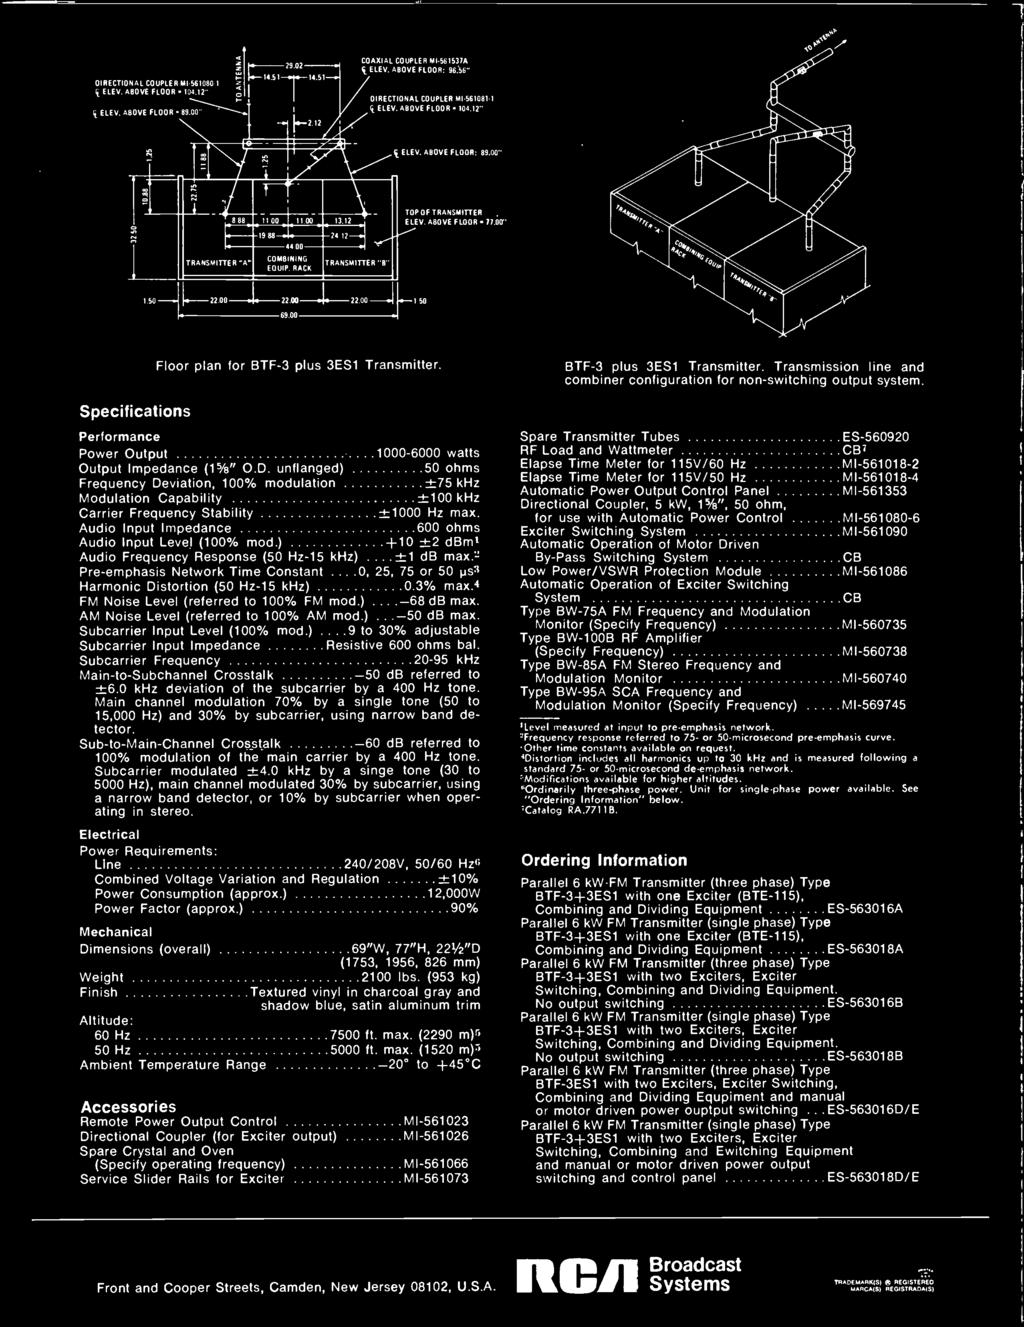 00 Specifications Floor plan for BTF-3 plus 3ES1 Transmitter. Performance Power Output 1000-6000 watts Output Impedance (15/8" O.D.